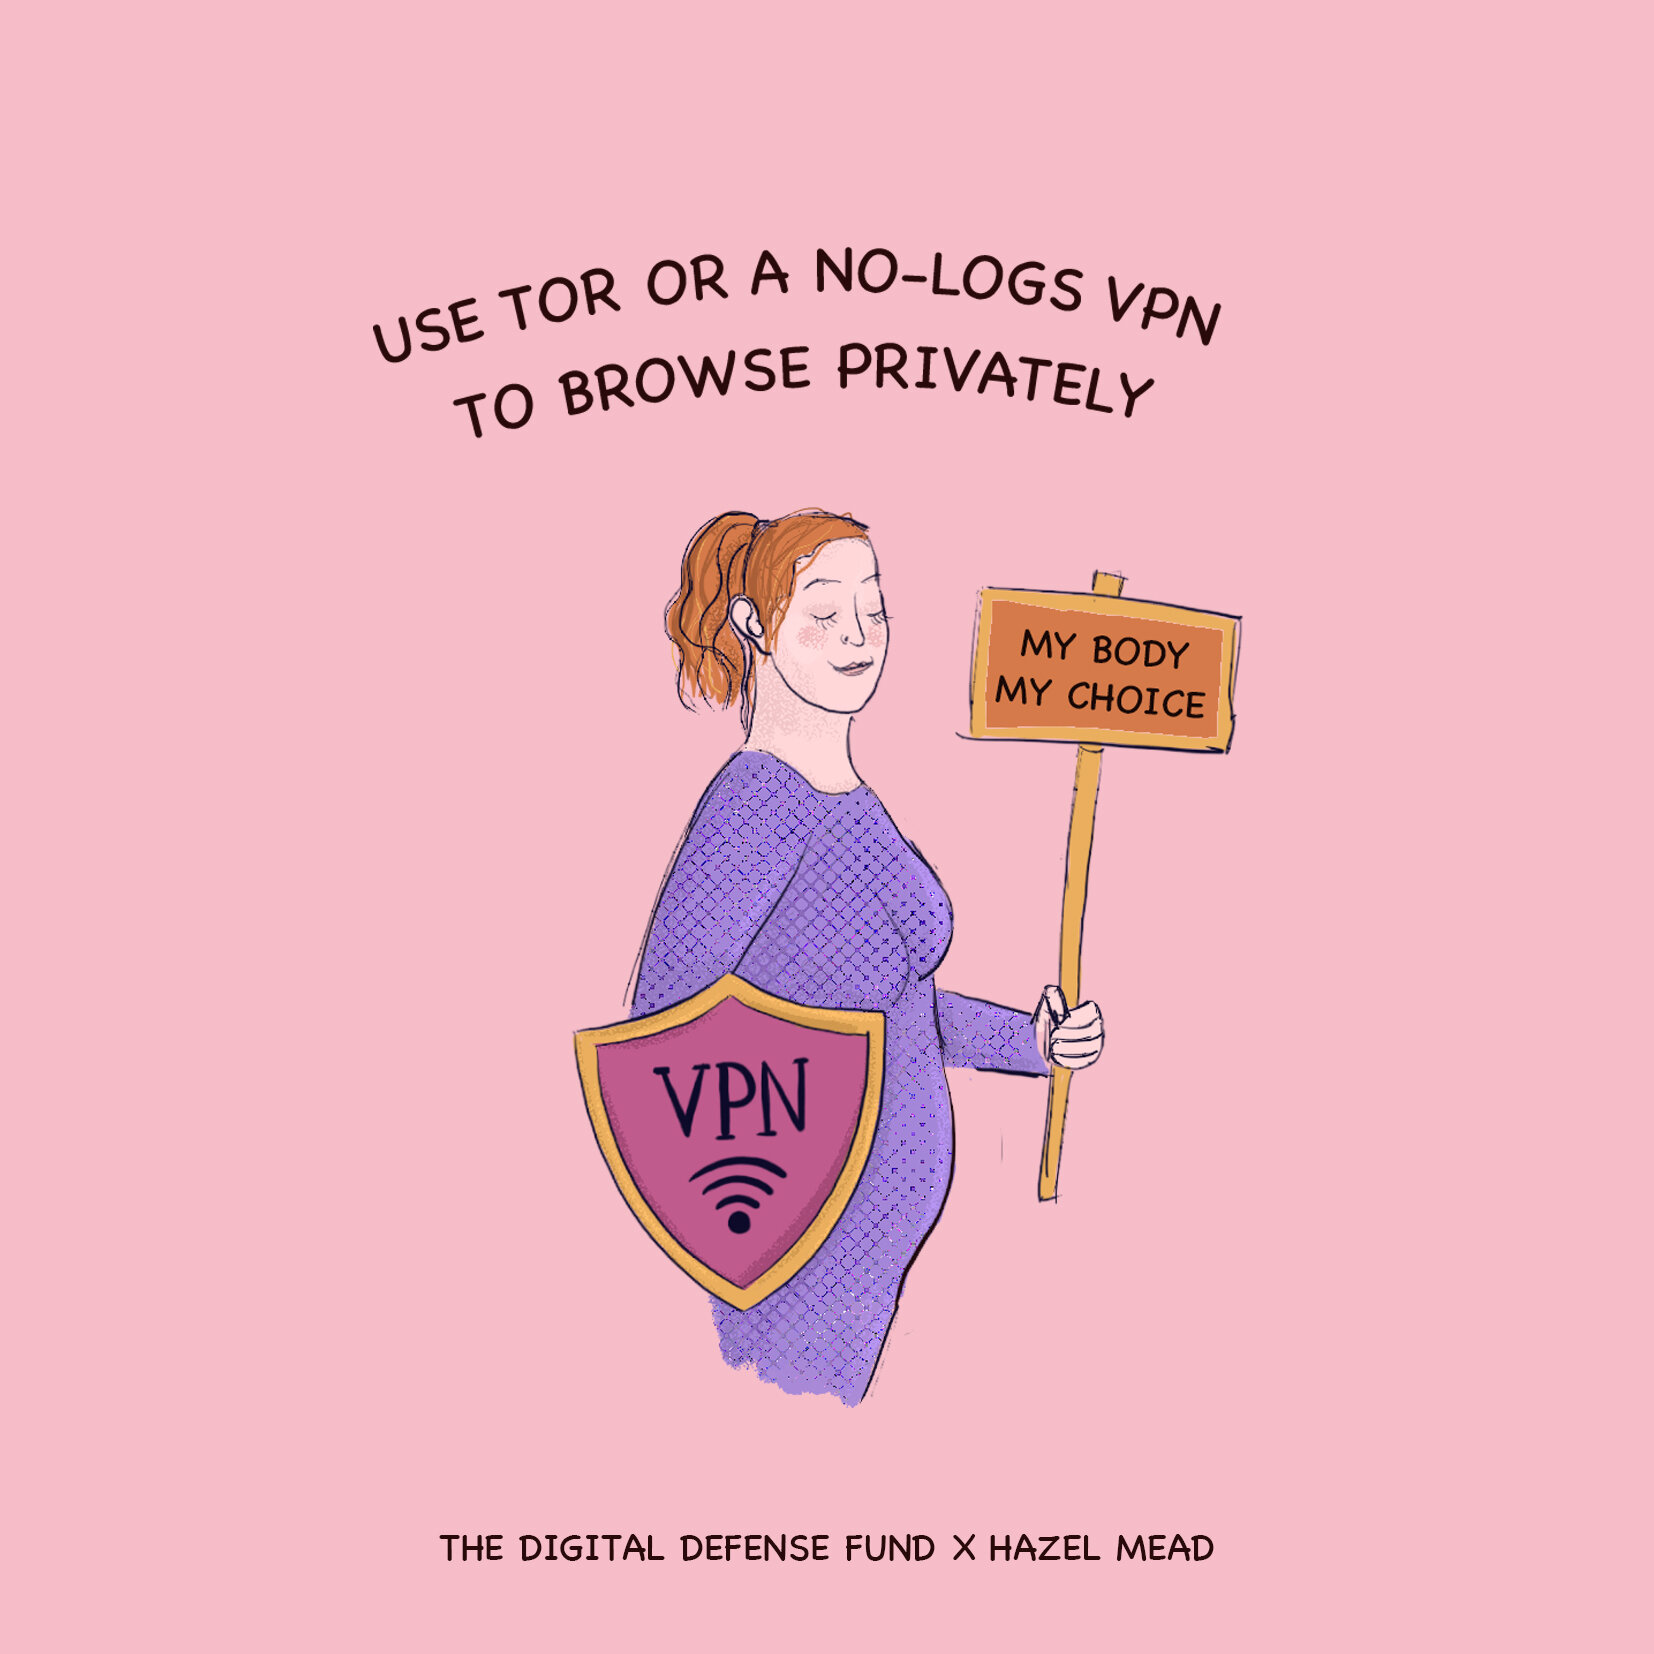 Woman holds a VPN shield. Clicking image leads to Tor download page.